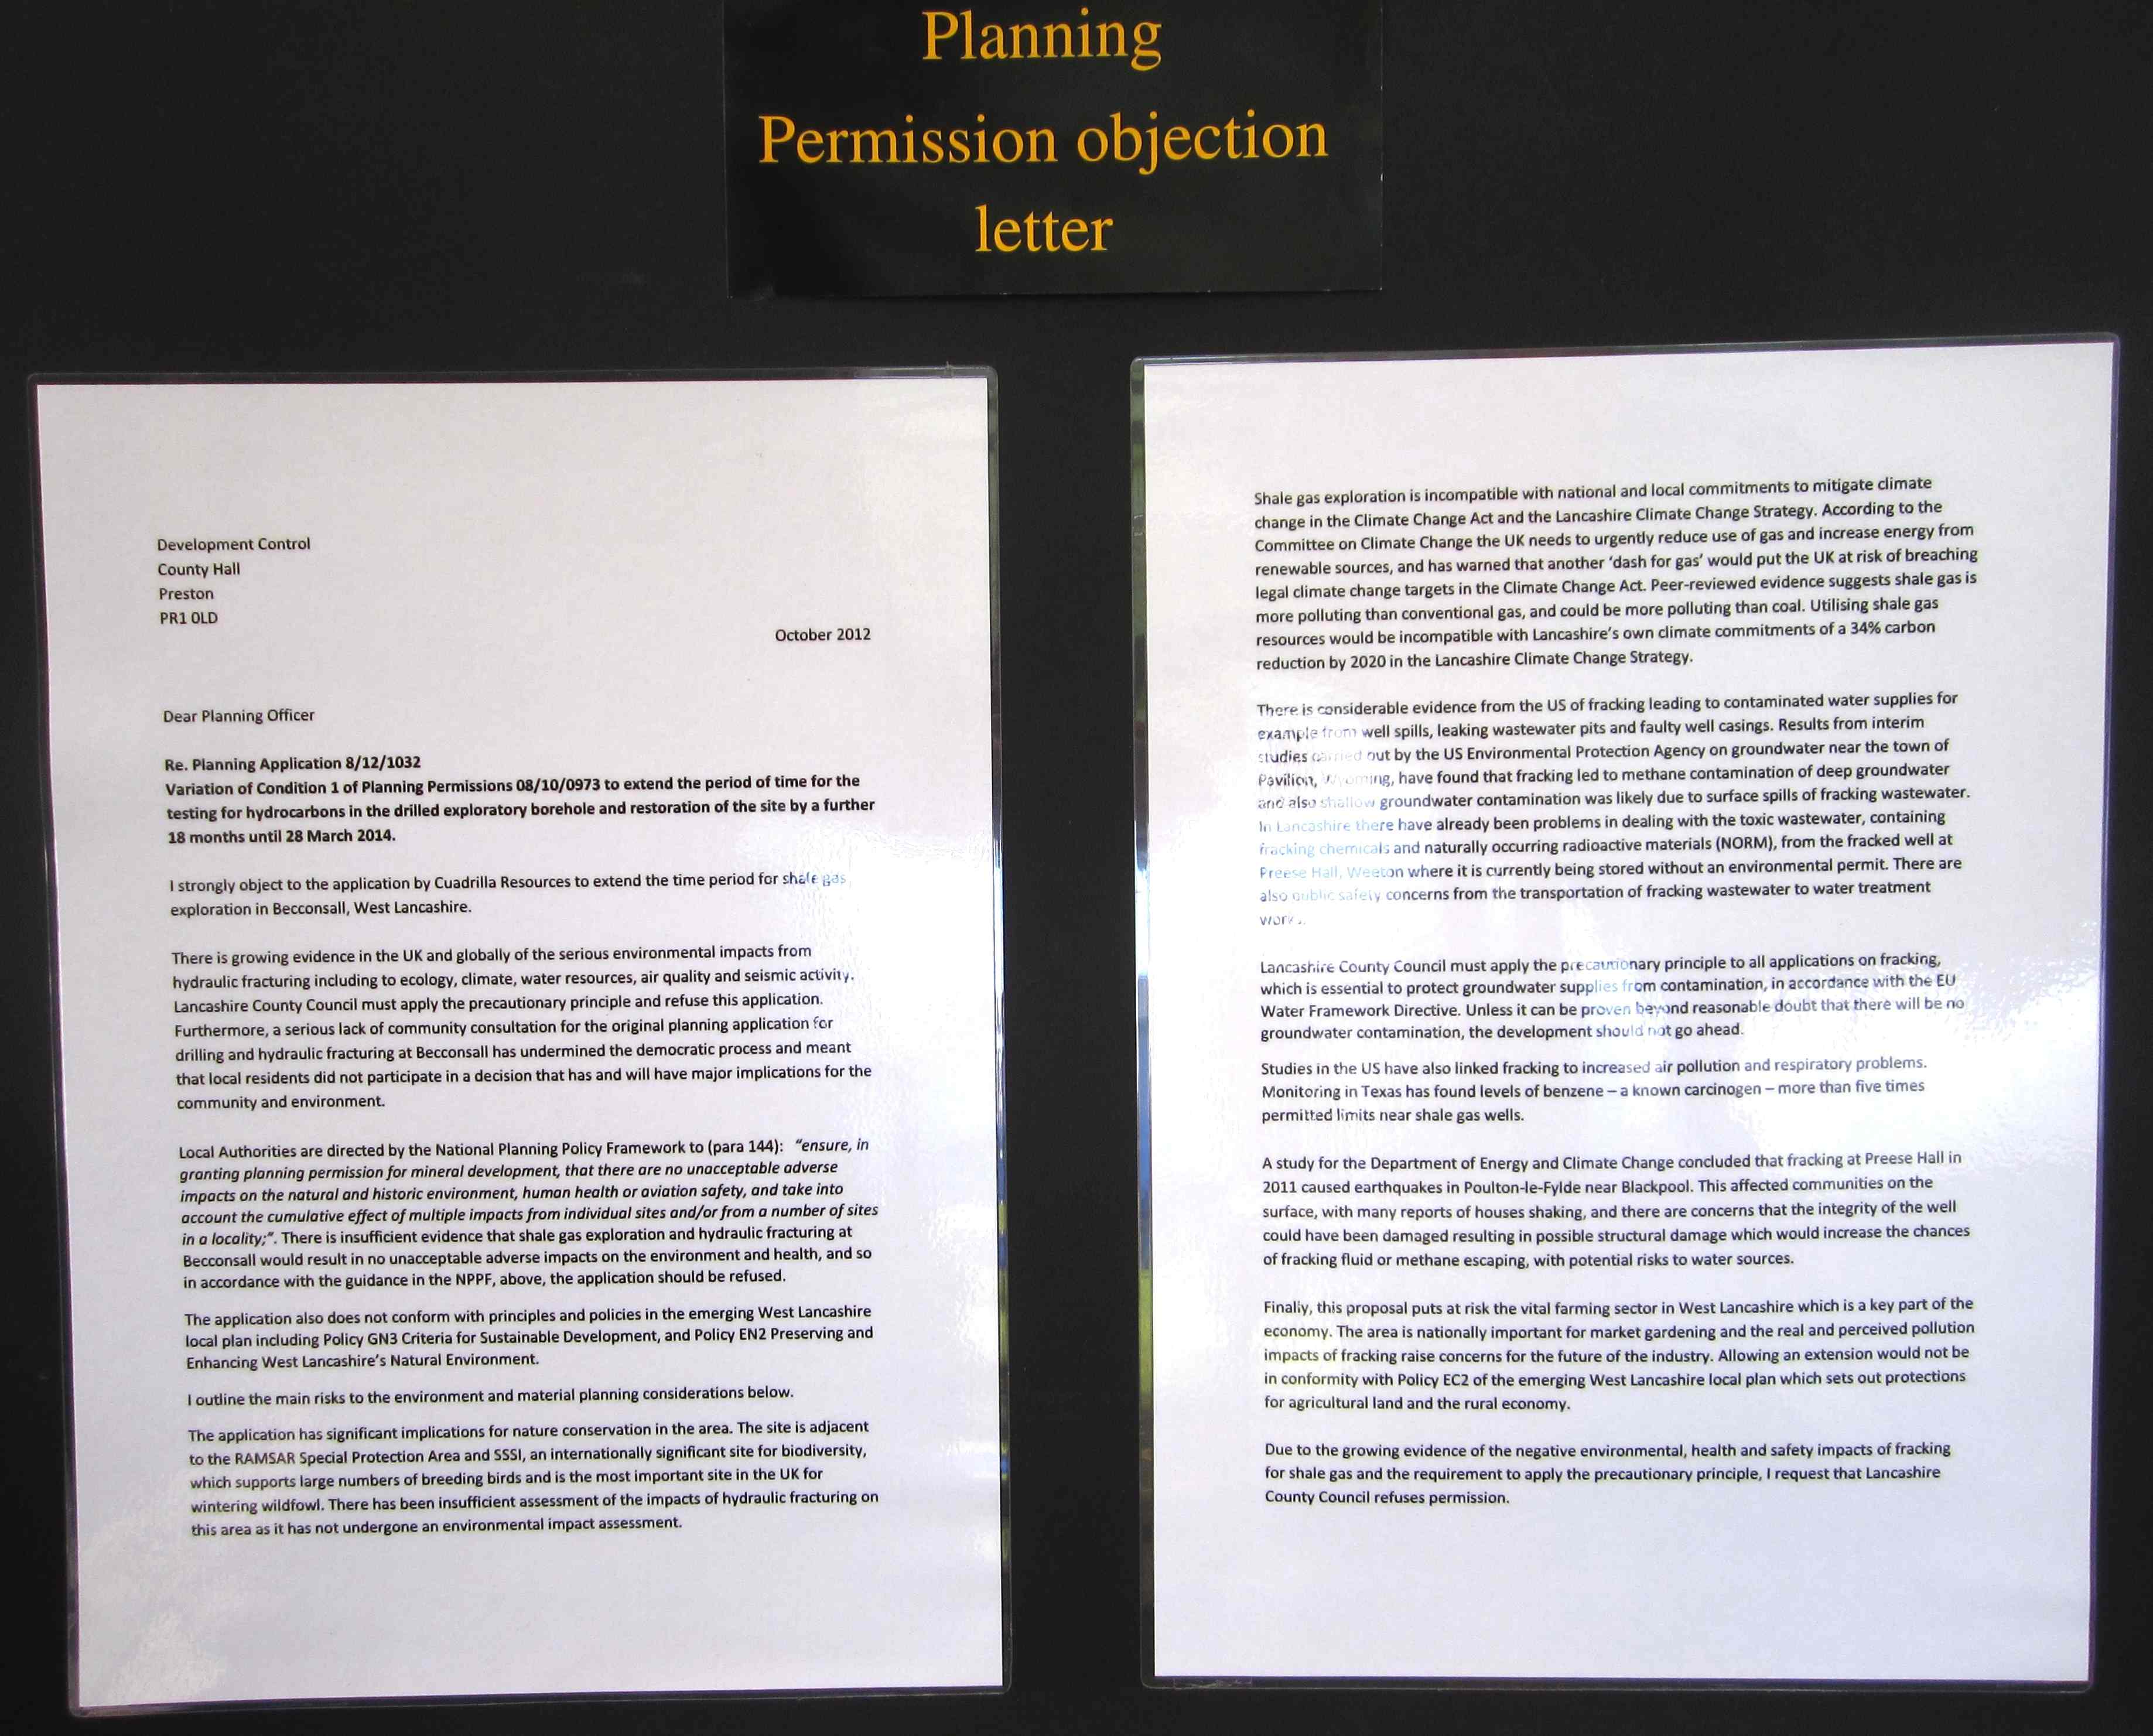 Planning Permission objection letter